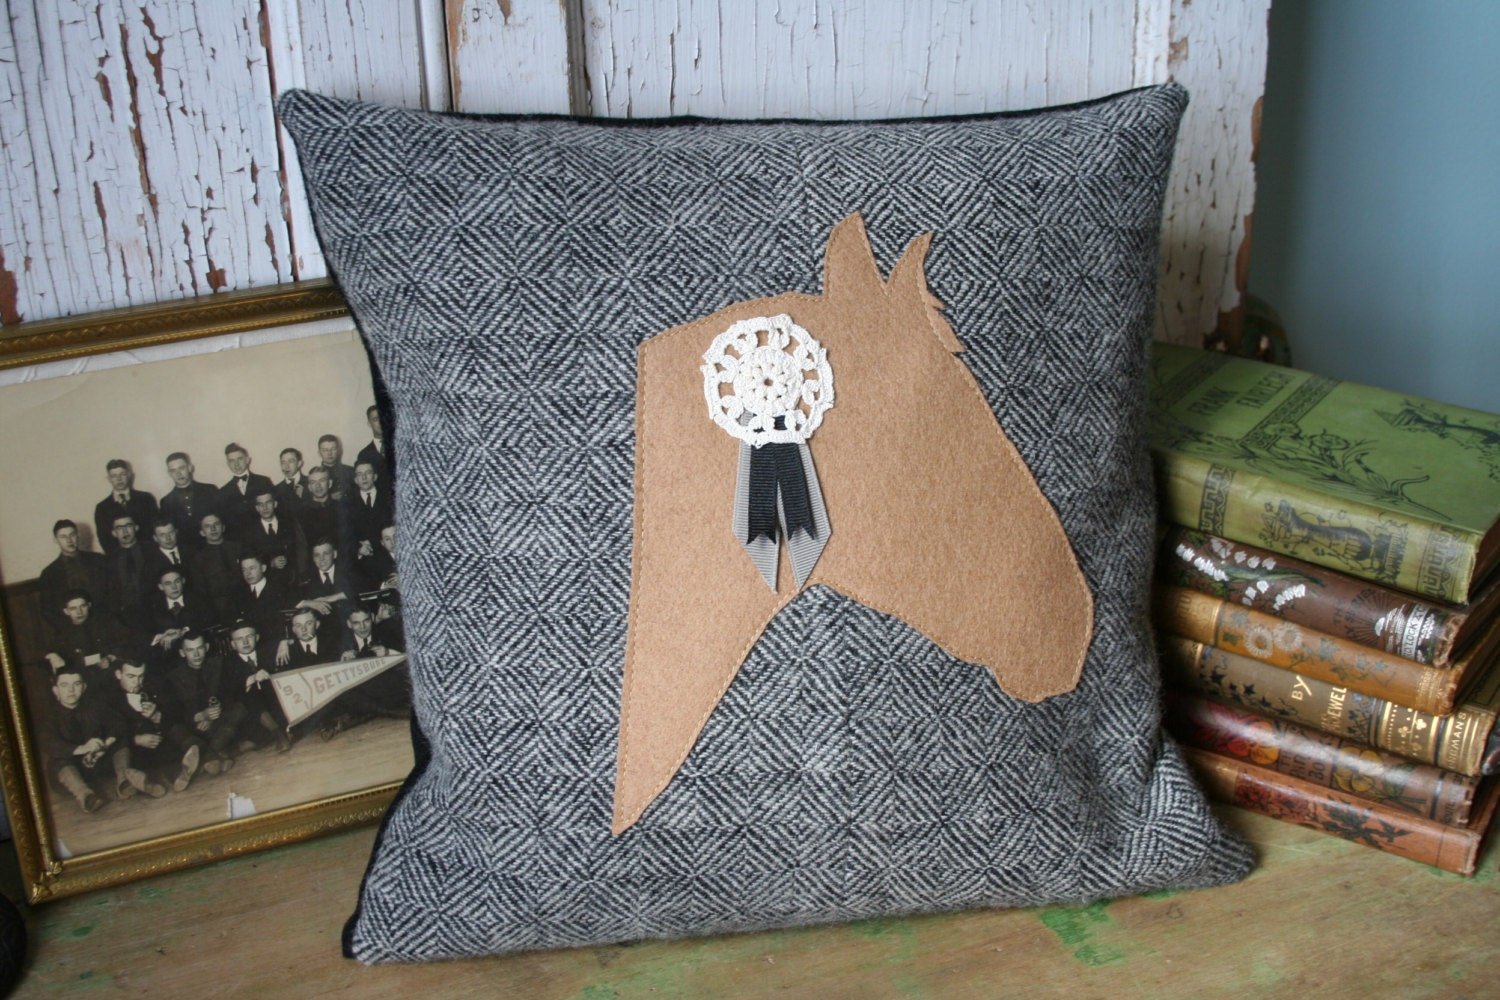 Equestrian Horse PILLOW COVER- Recycled Wool, Gray Herringbone, Vintage Lace